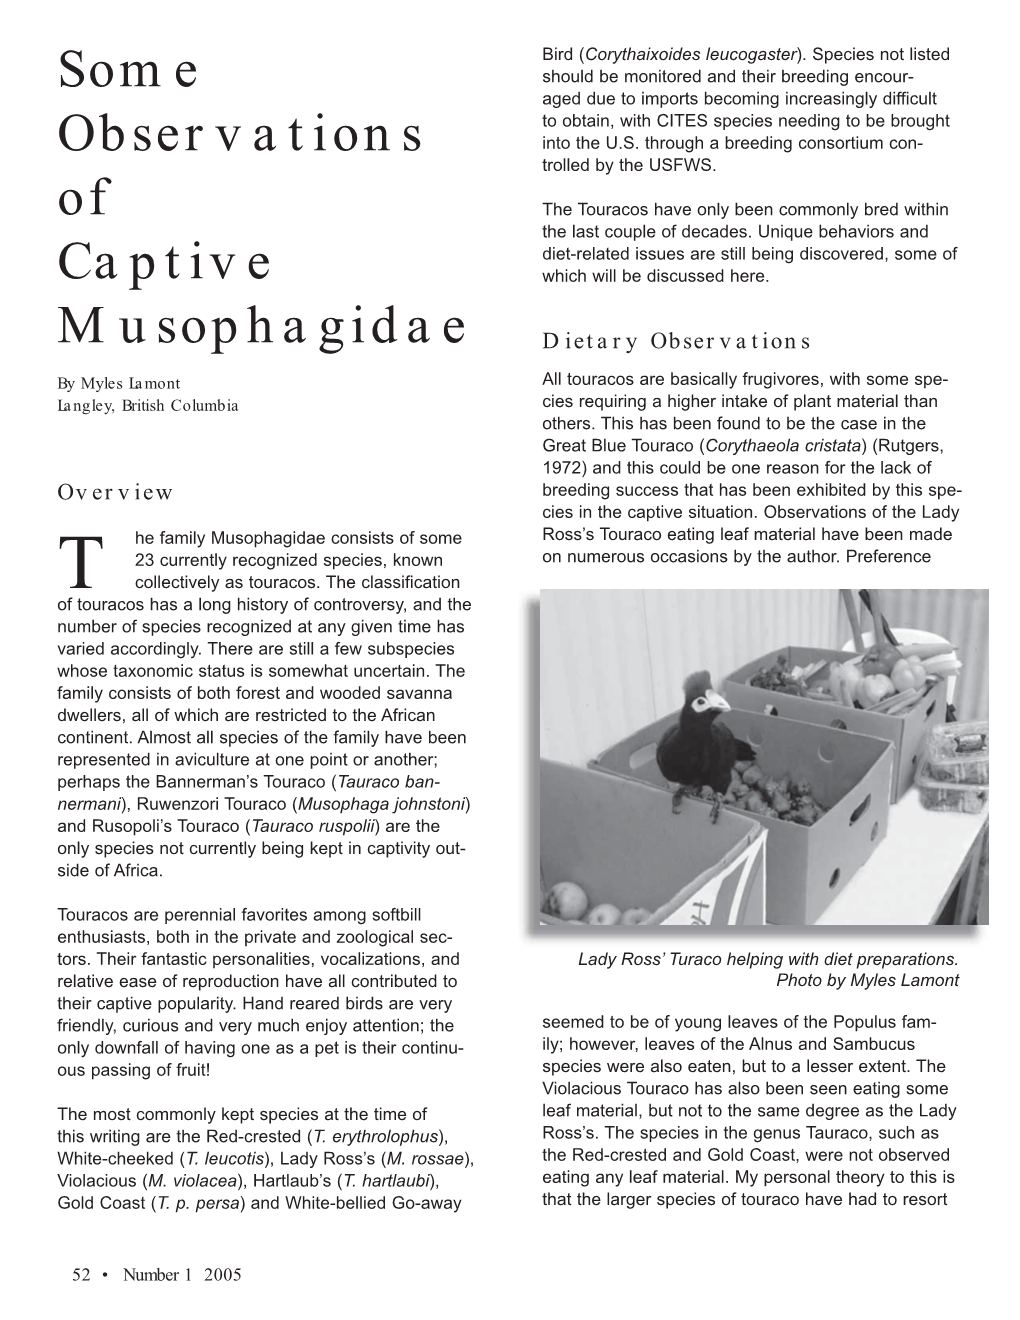 Some Observations of Captive Musophagidae